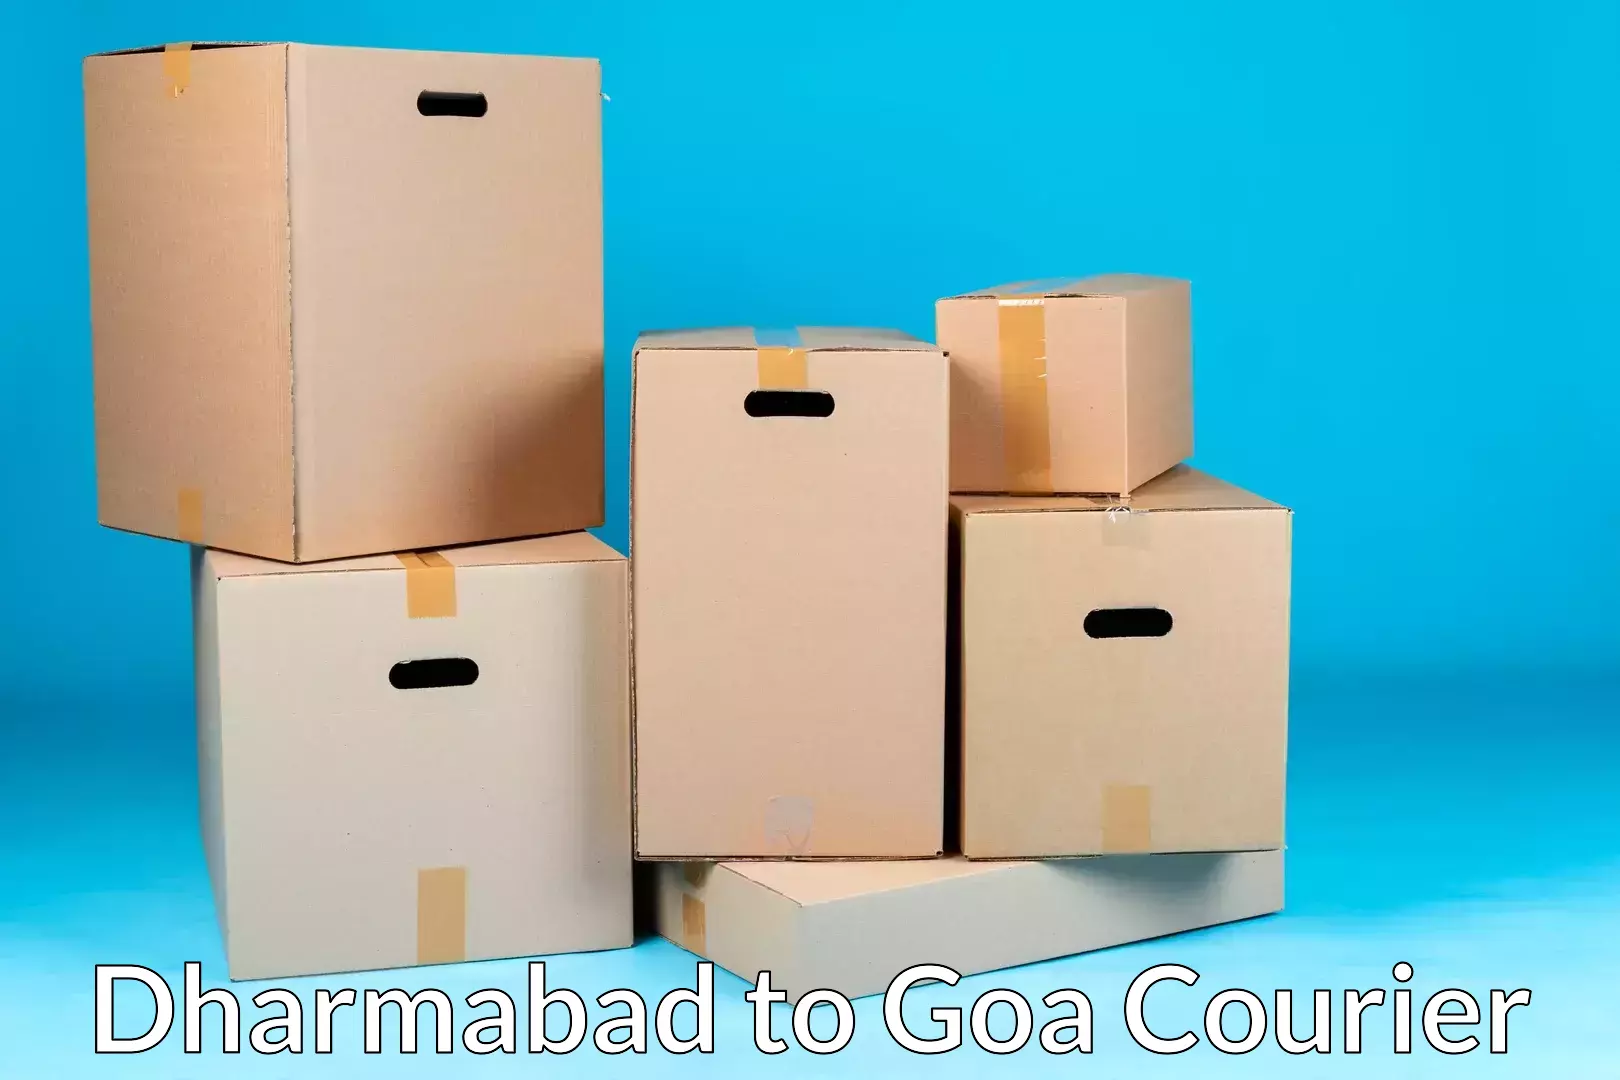 Hassle-free relocation Dharmabad to Goa University